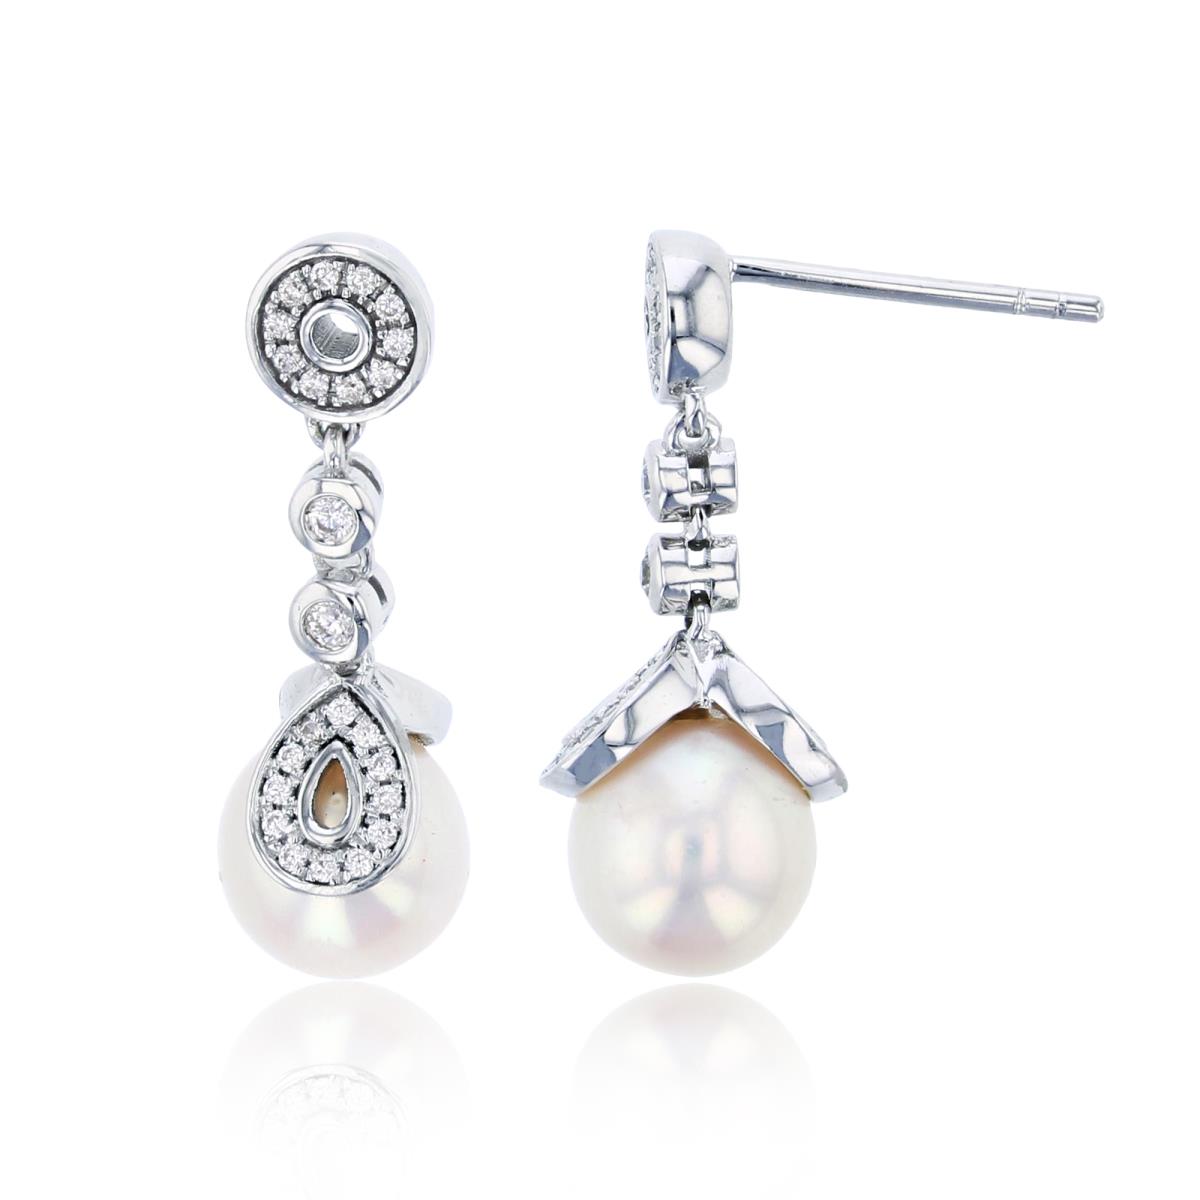 10K White Gold 0.24 CTTW Rnd Diam & 7mm Rnd White Pearl with Leaves Dangling Earring